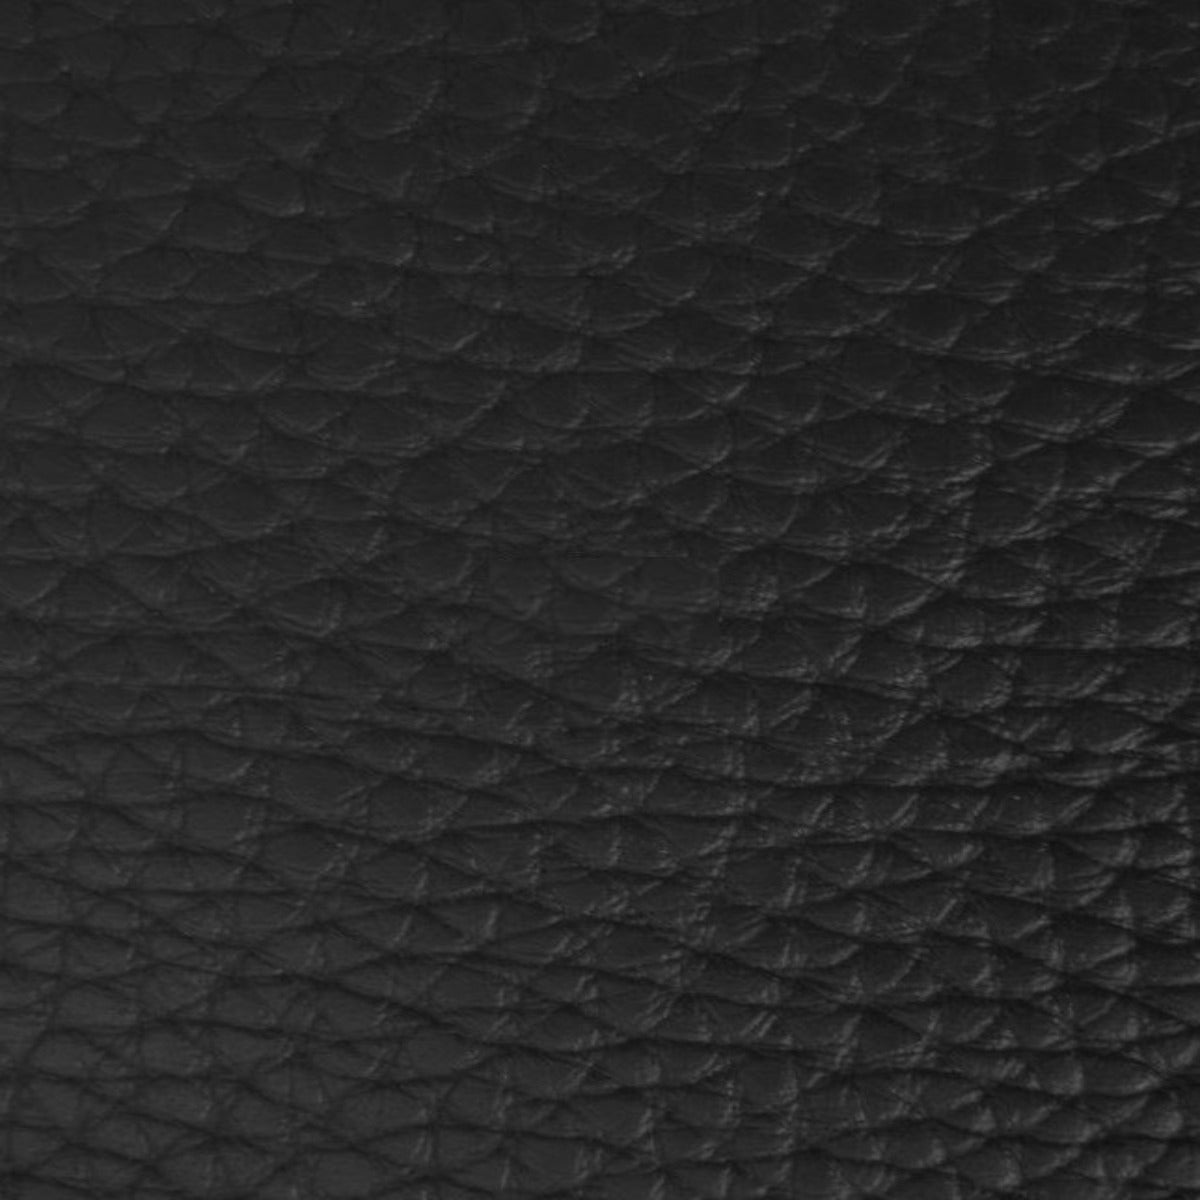 Brown 1.0 mm Thickness Textured PVC Faux Leather Vinyl Fabric